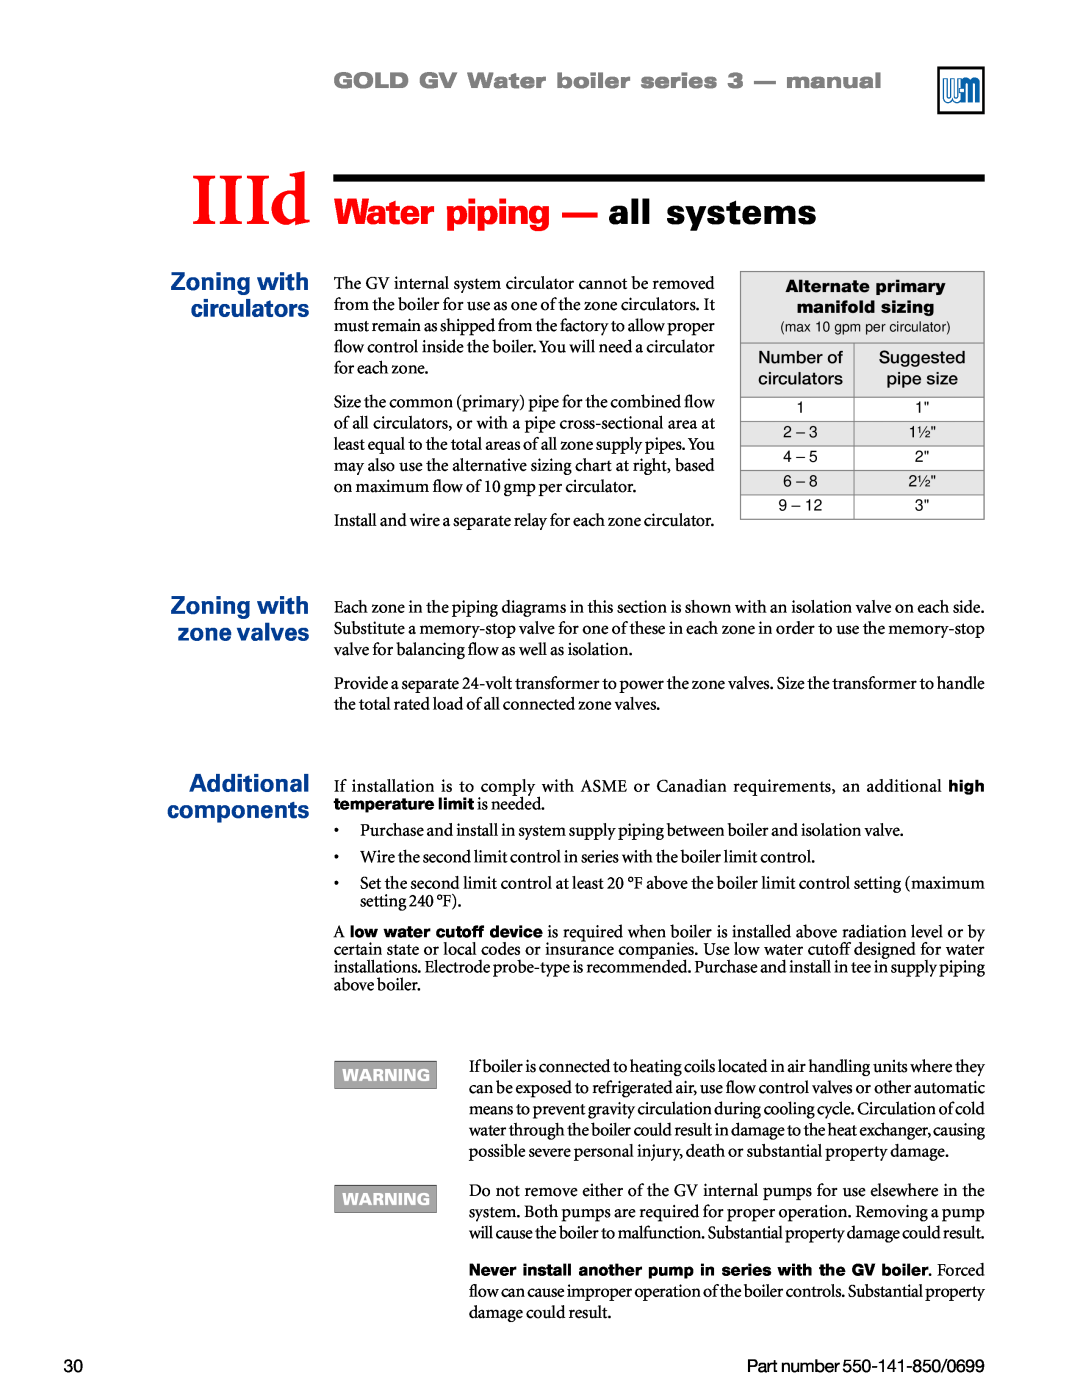 Weil-McLain GOLD DV WATER BOILER manual IIId Water piping — all systems, Additional components, Zoning with circulators 